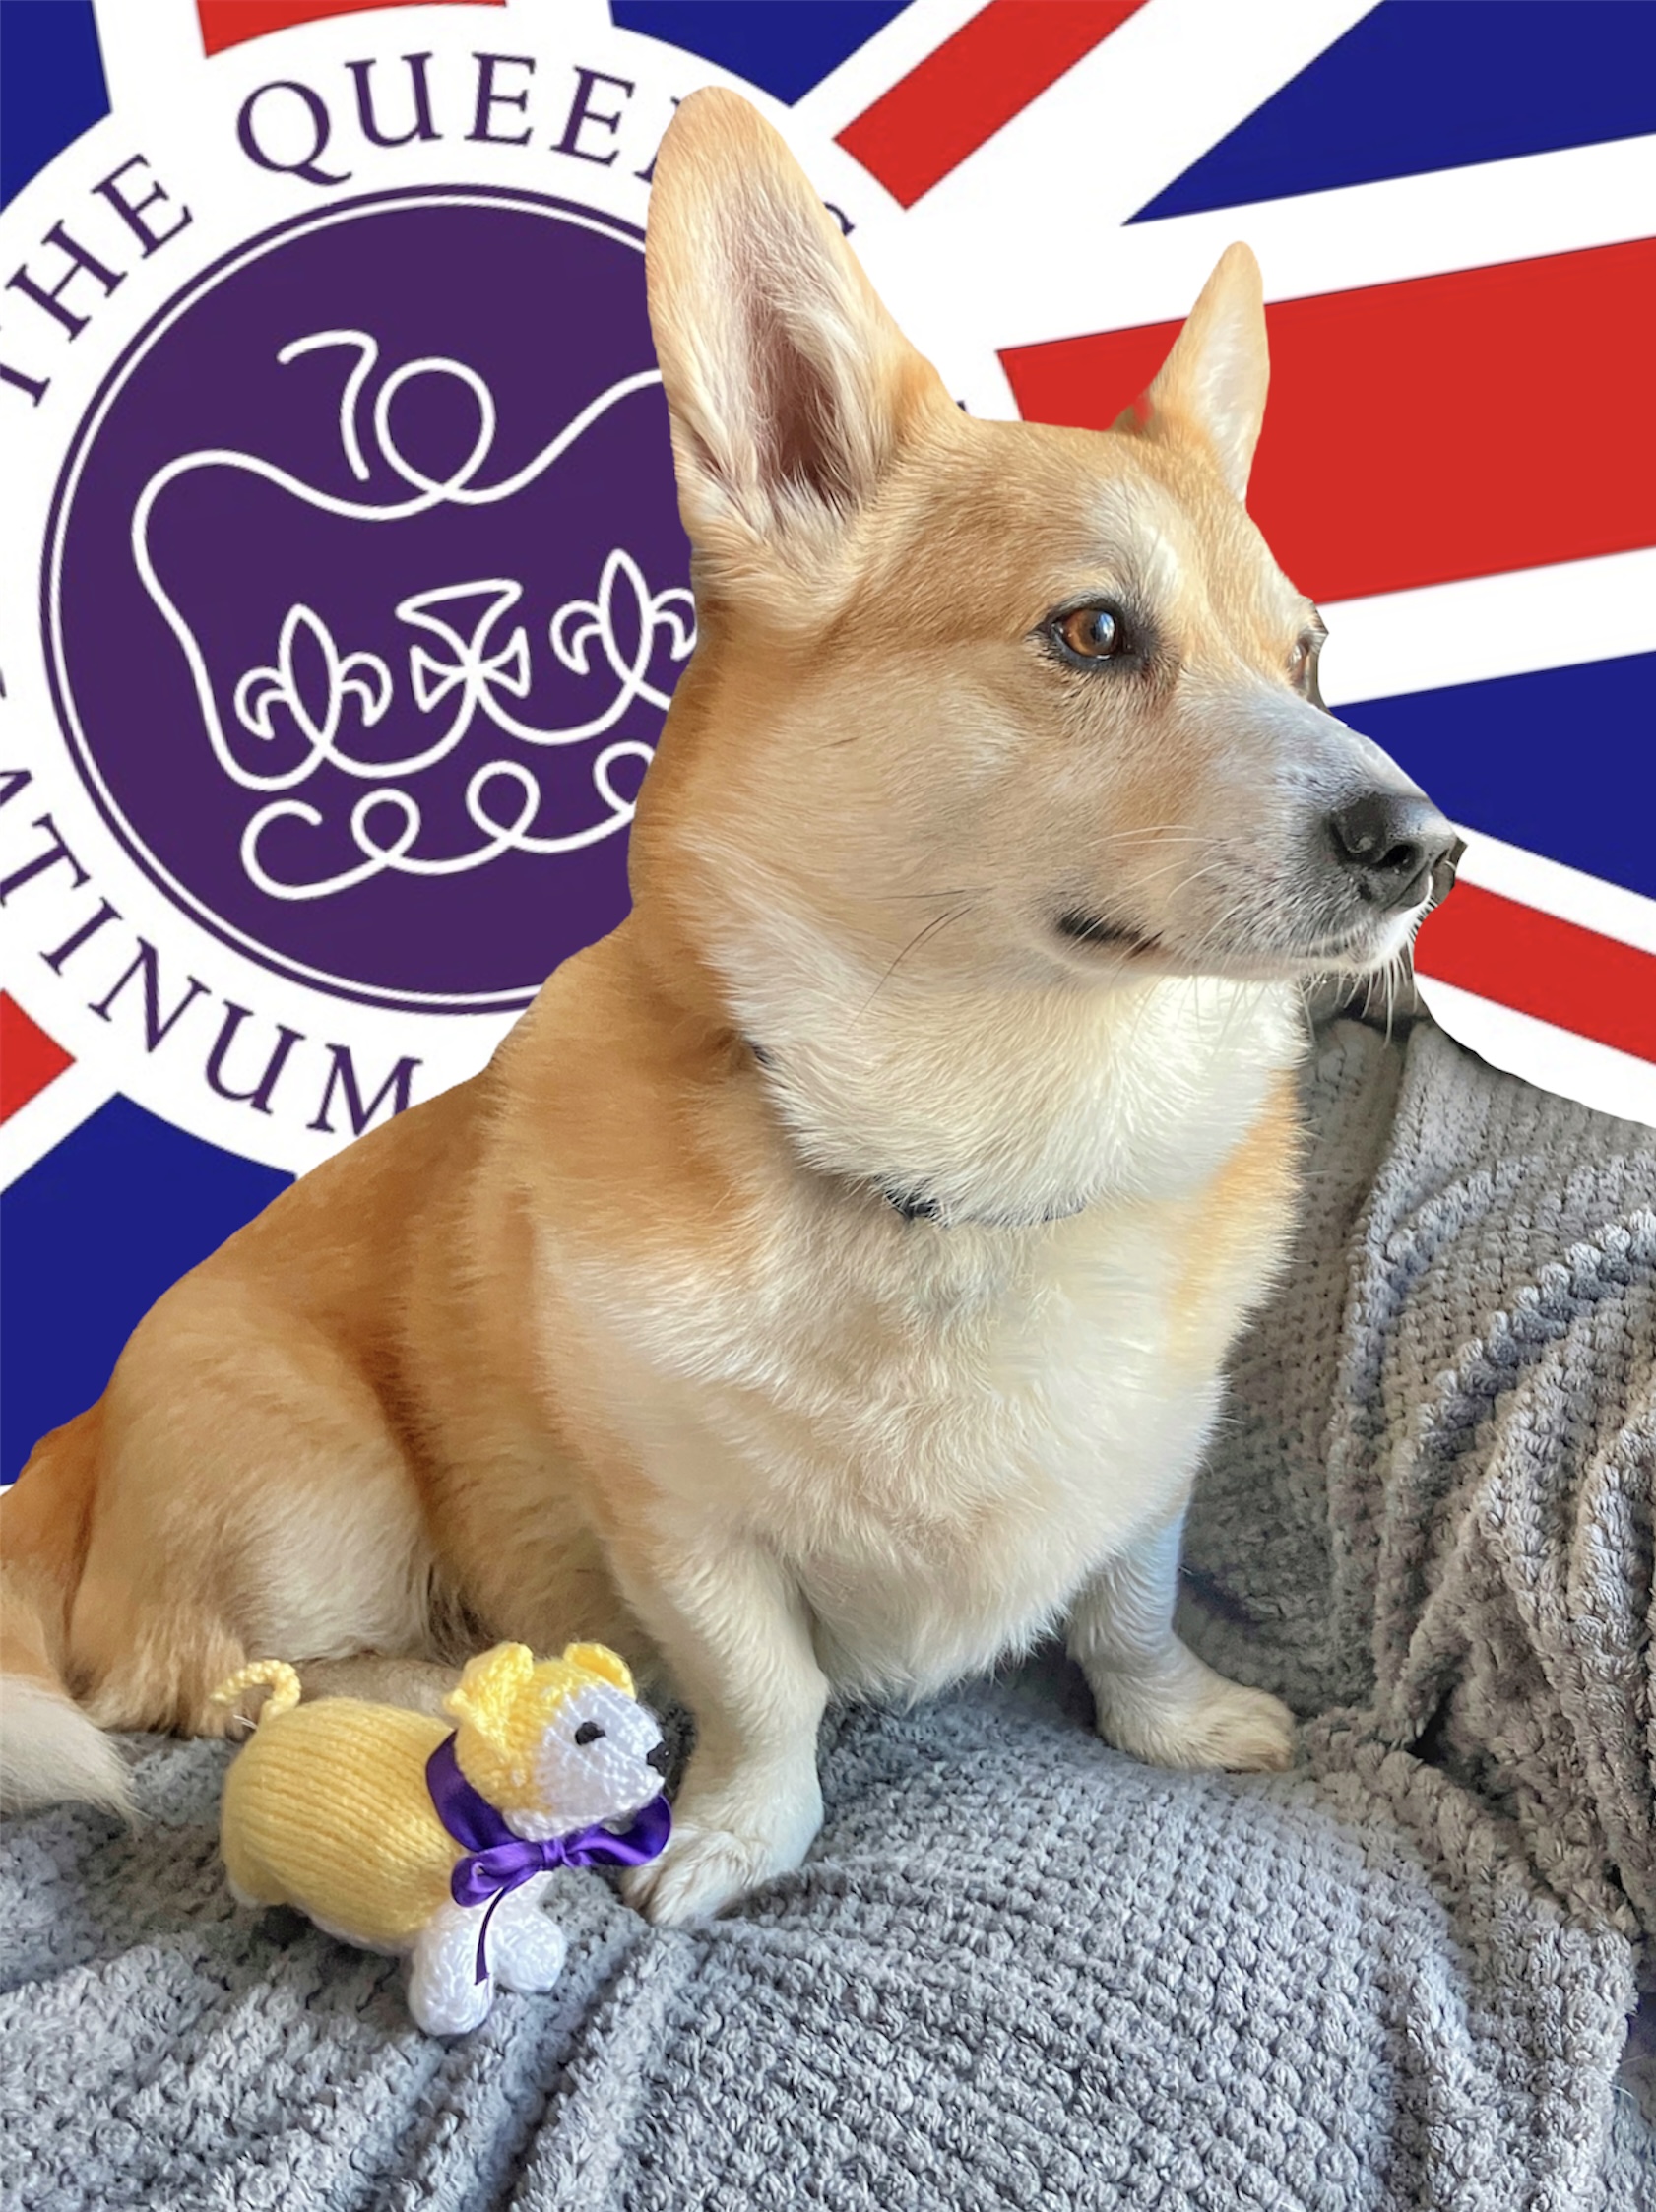 The many adventures of the Queen’s corgi’s